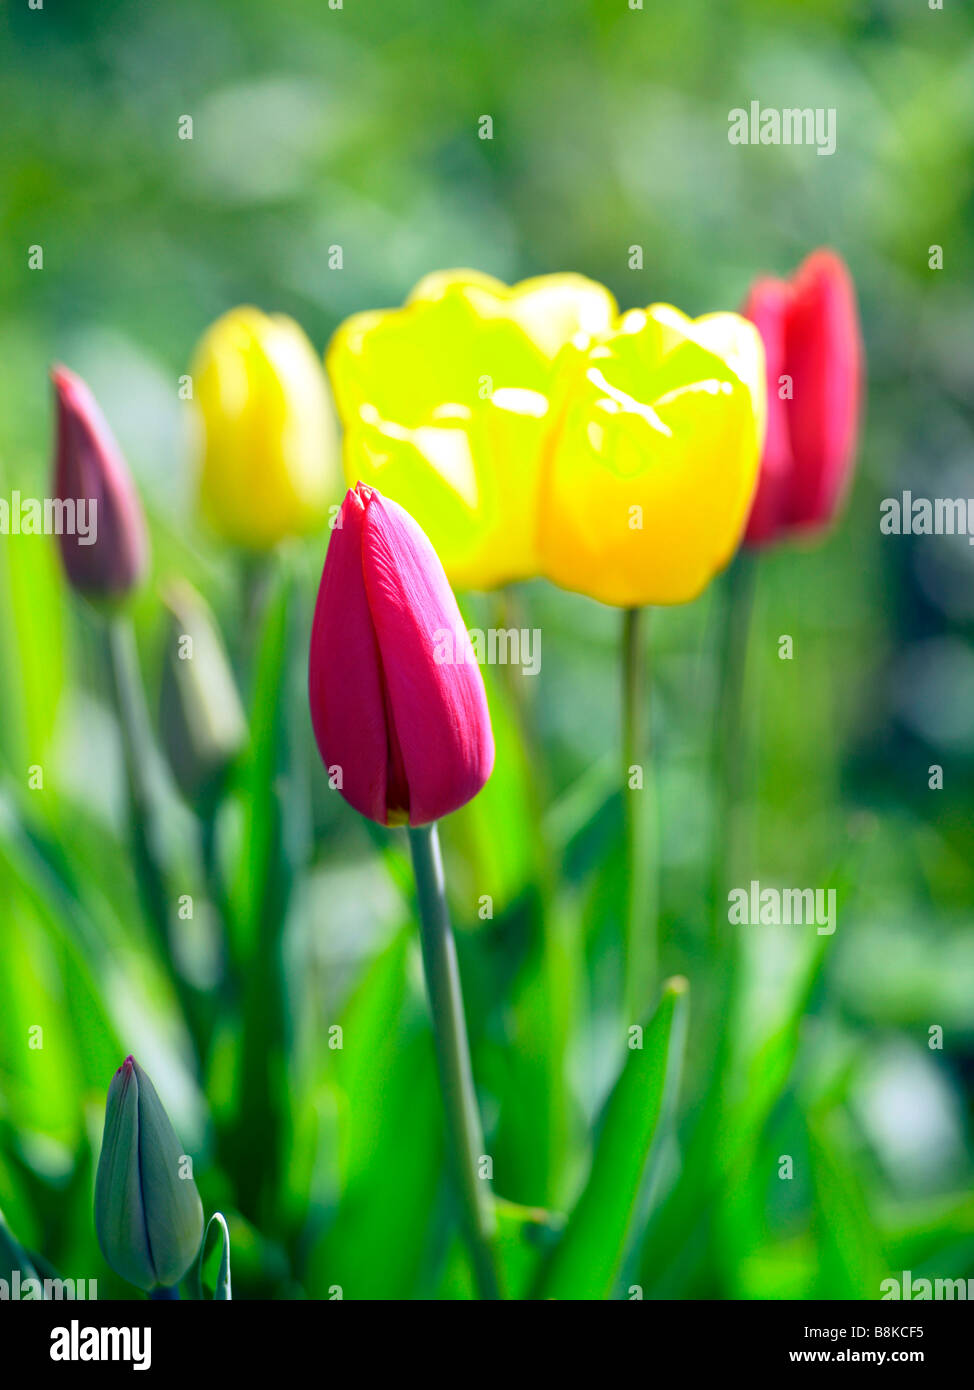 red an yellow tulips Stock Photo